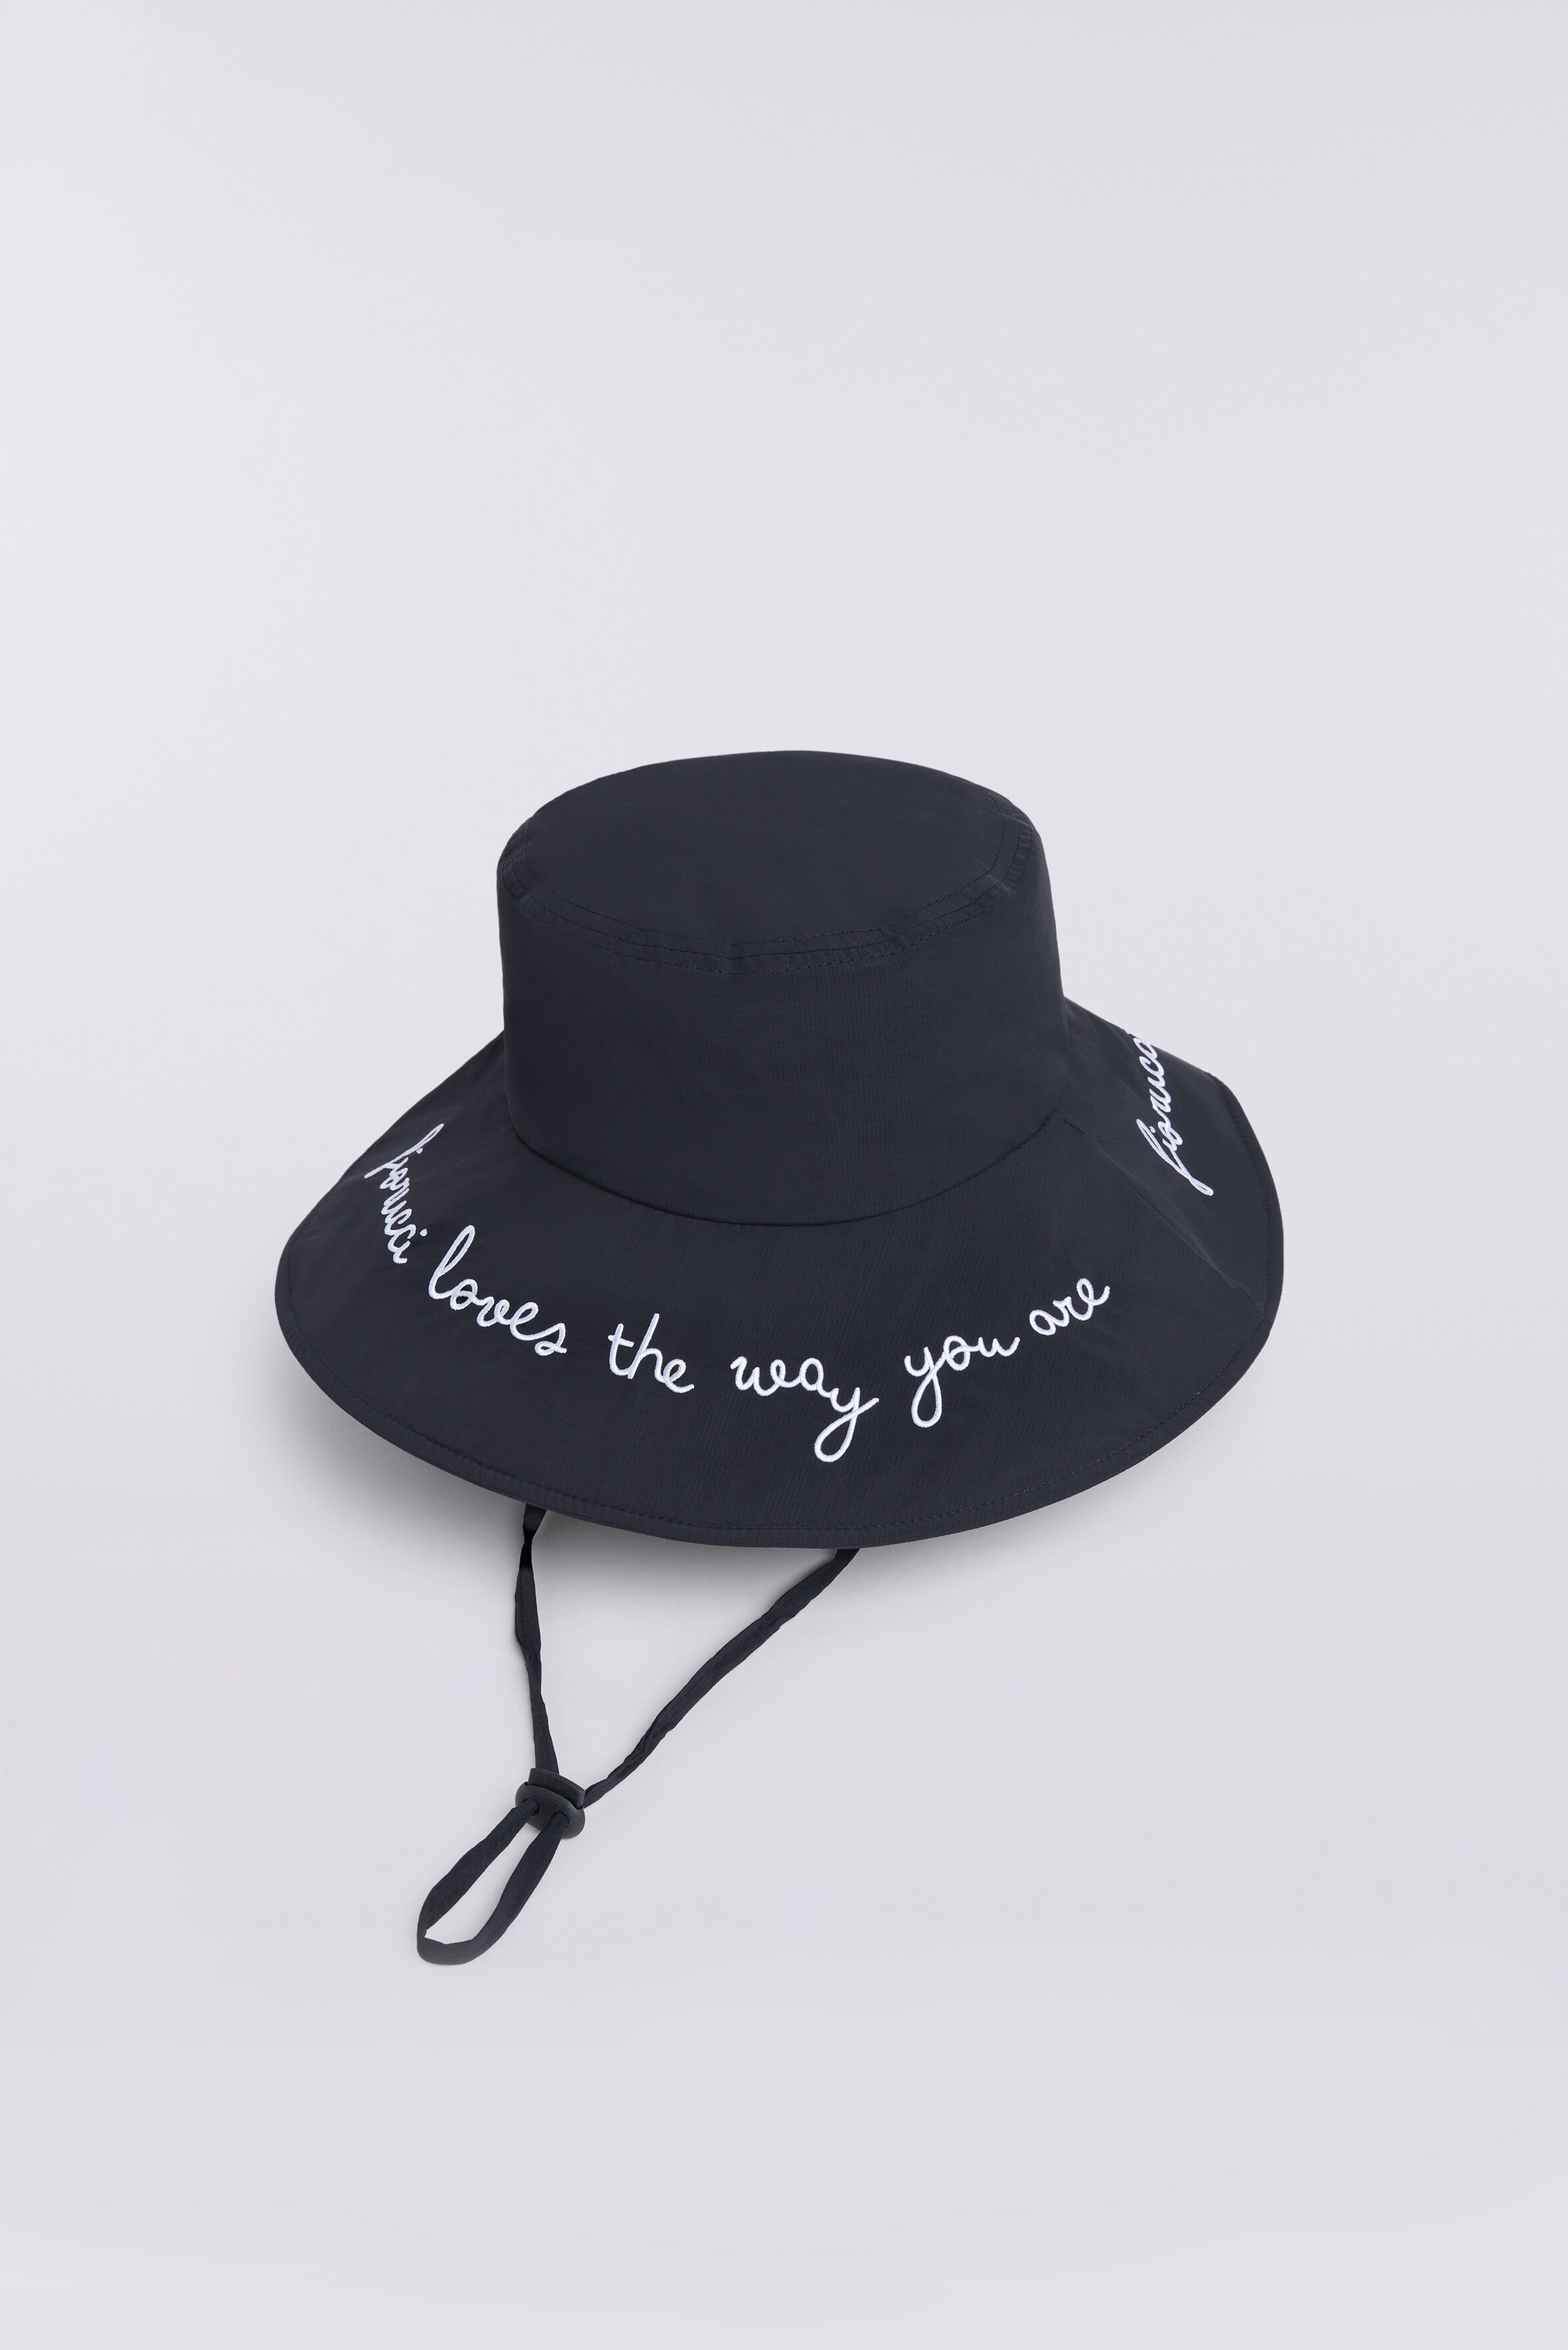 Fiorucci Official Online Store | Embroidered Bucket Hat Black 